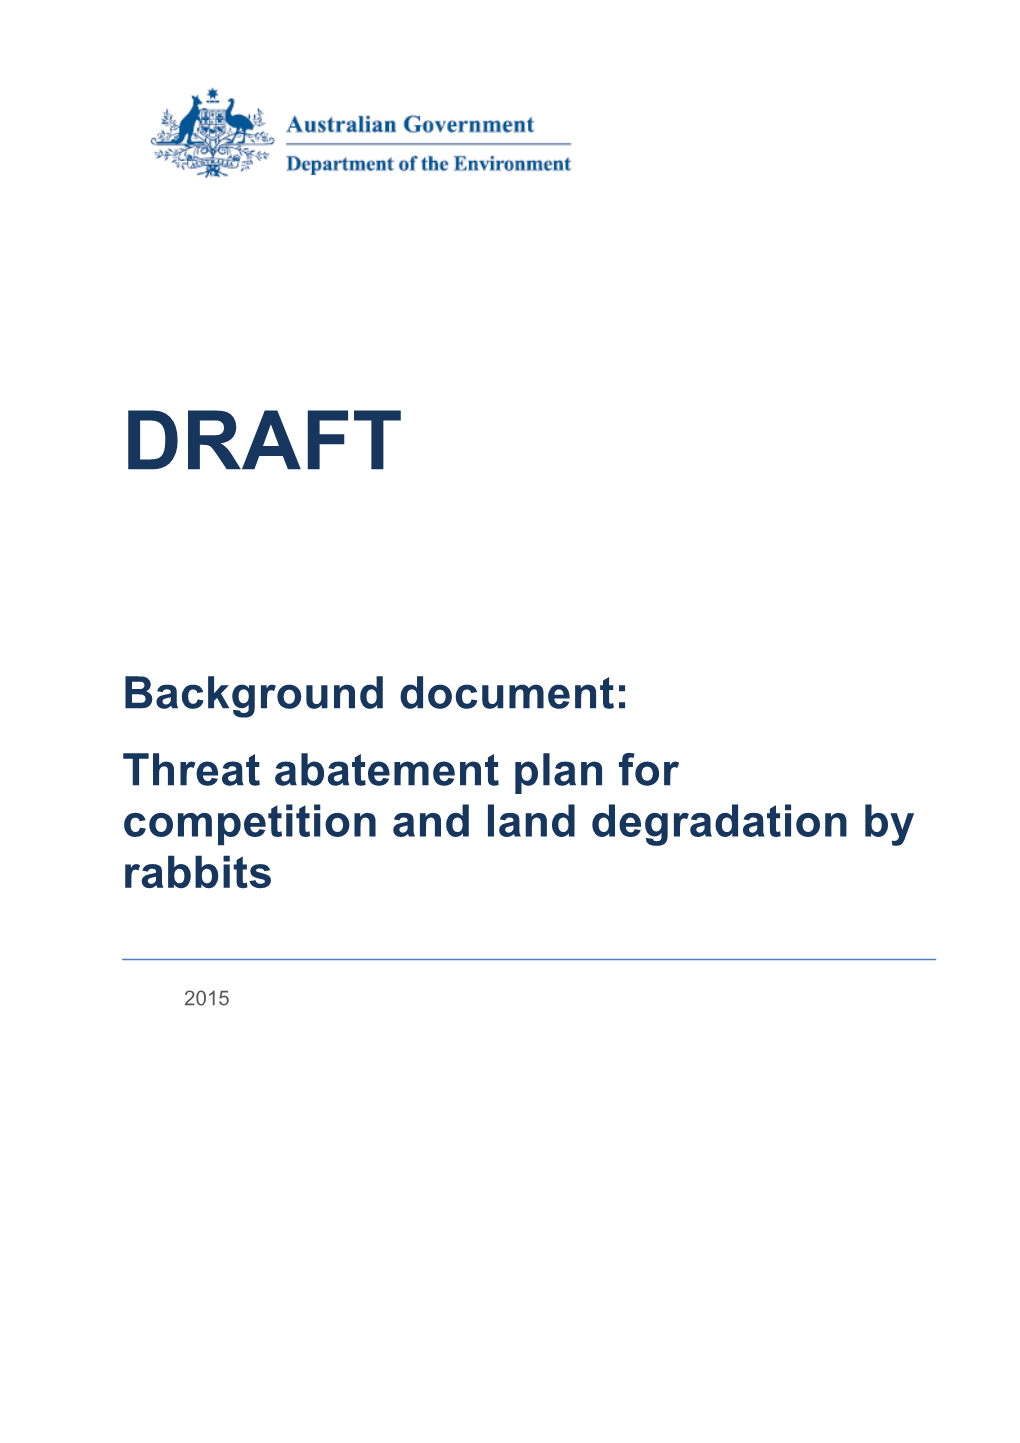 Draft Background Document: Threat Abatement Plan for Competition and Land Degradation by Rabbits